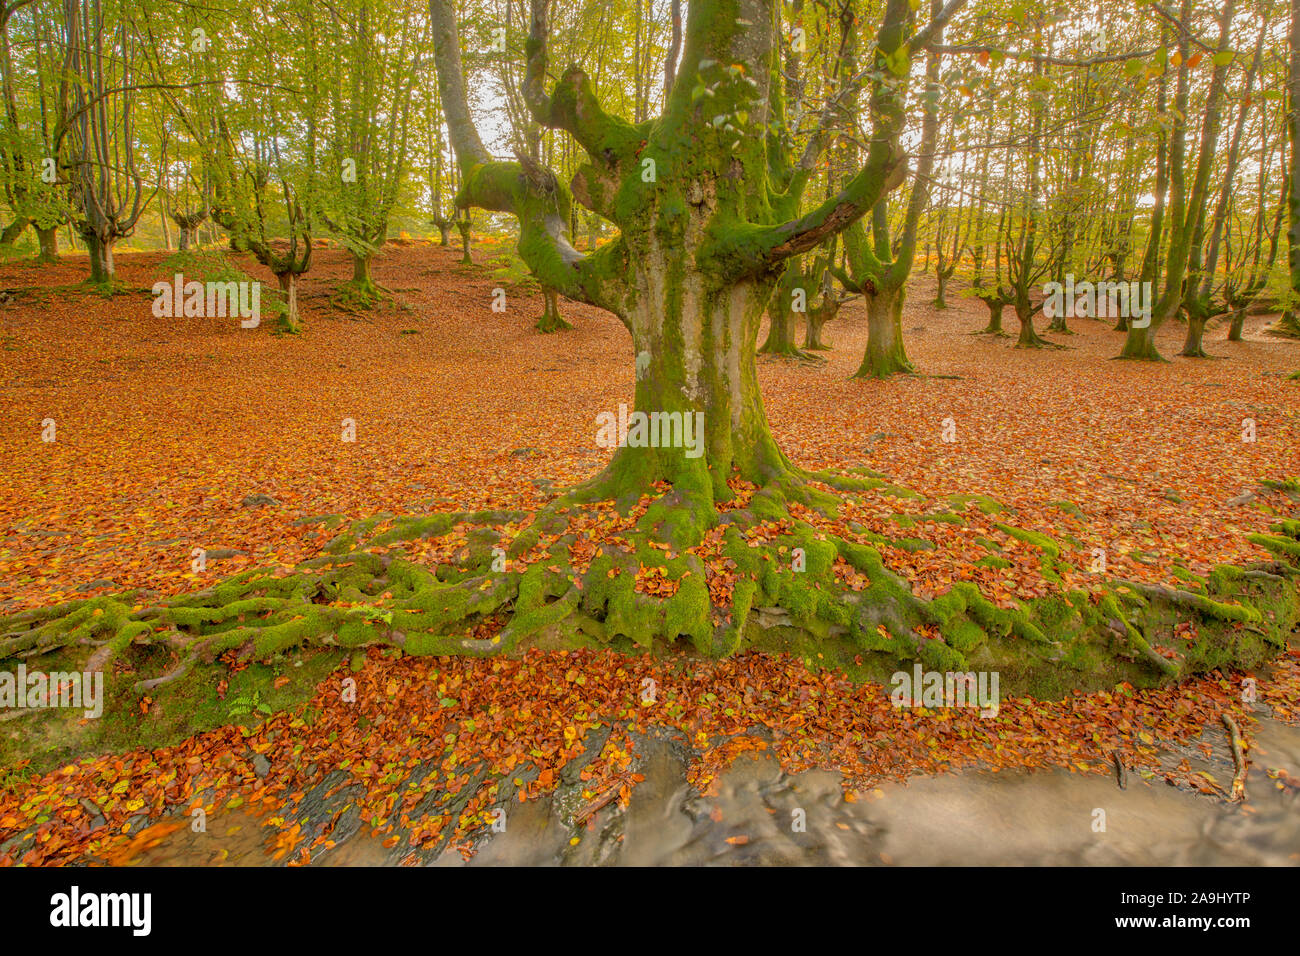 Beechwood trees in fall,  Otzaretta Forest, Gorbea Natural Park, Spain, Basque Country forest park, Often called obne of the World's most beuatiful fo Stock Photo